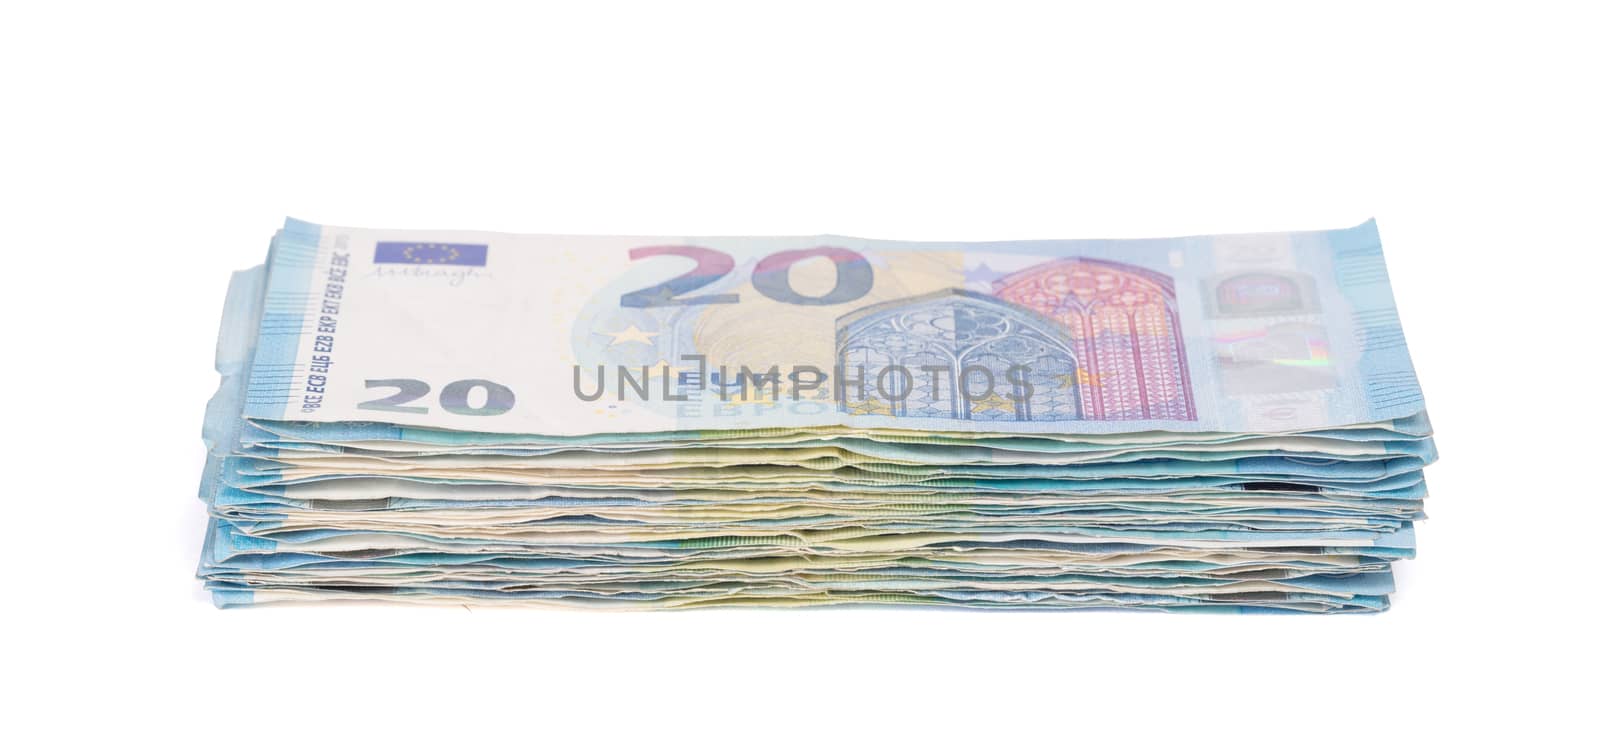 Stack of euro banknotes, isolated on white